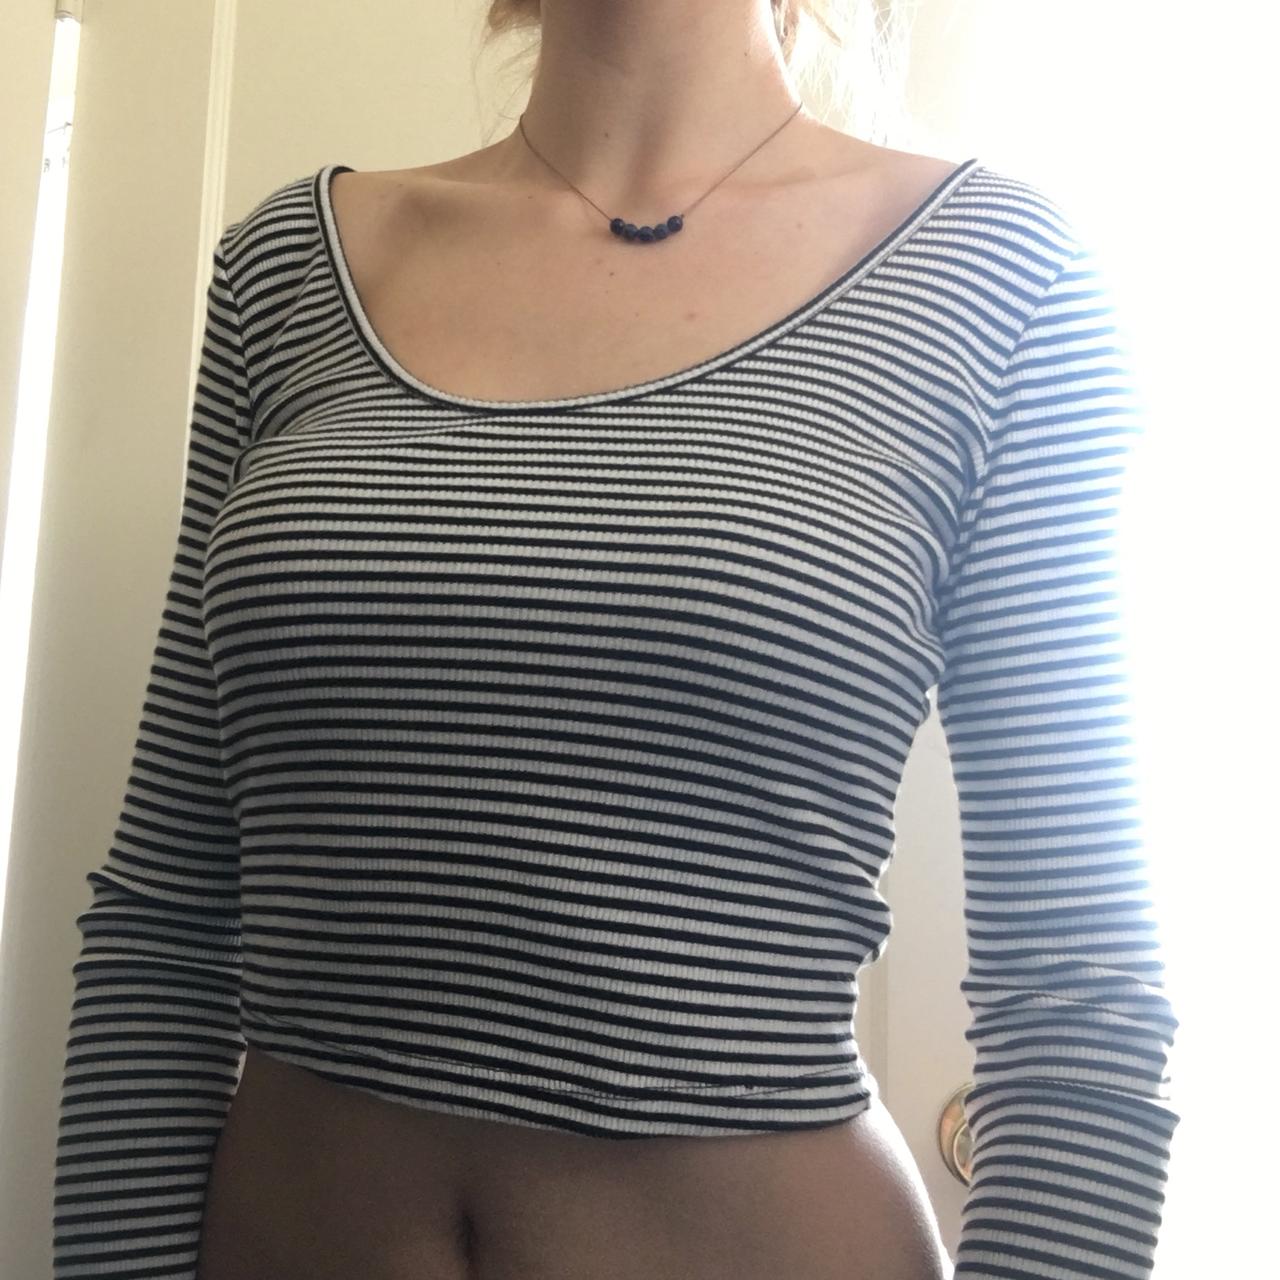 CURRENTLY NOT AVAILABLE brandy melville striped long - Depop